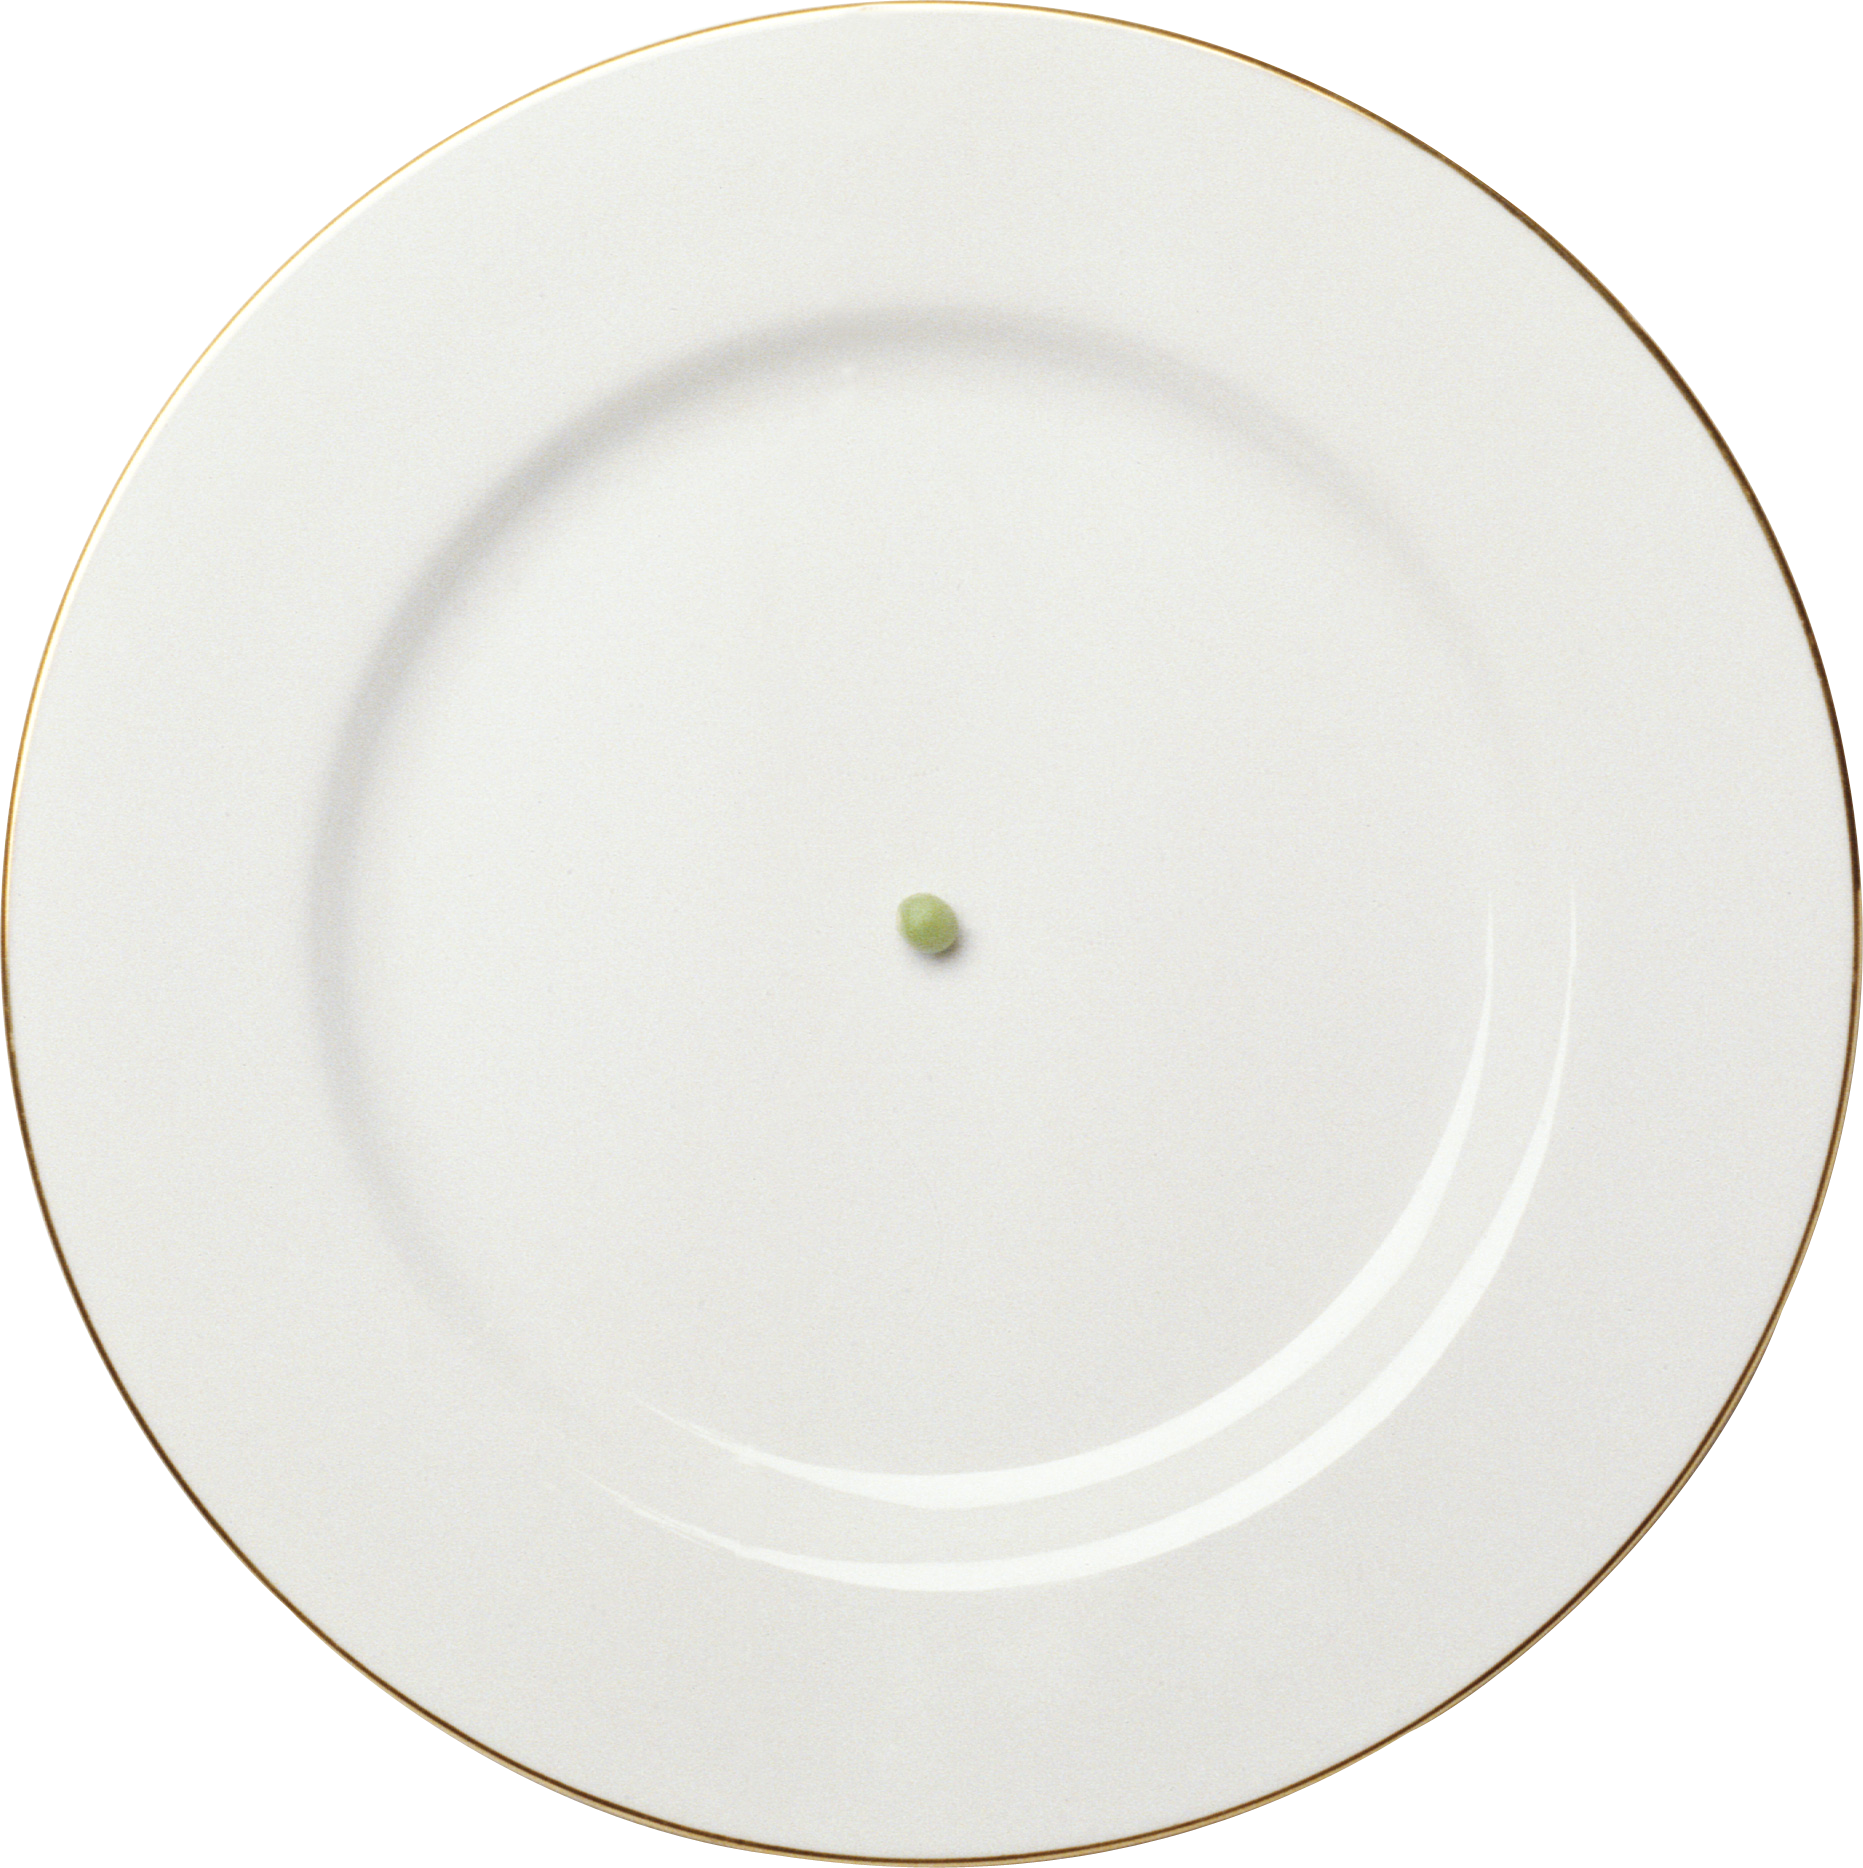 Plate PNG image